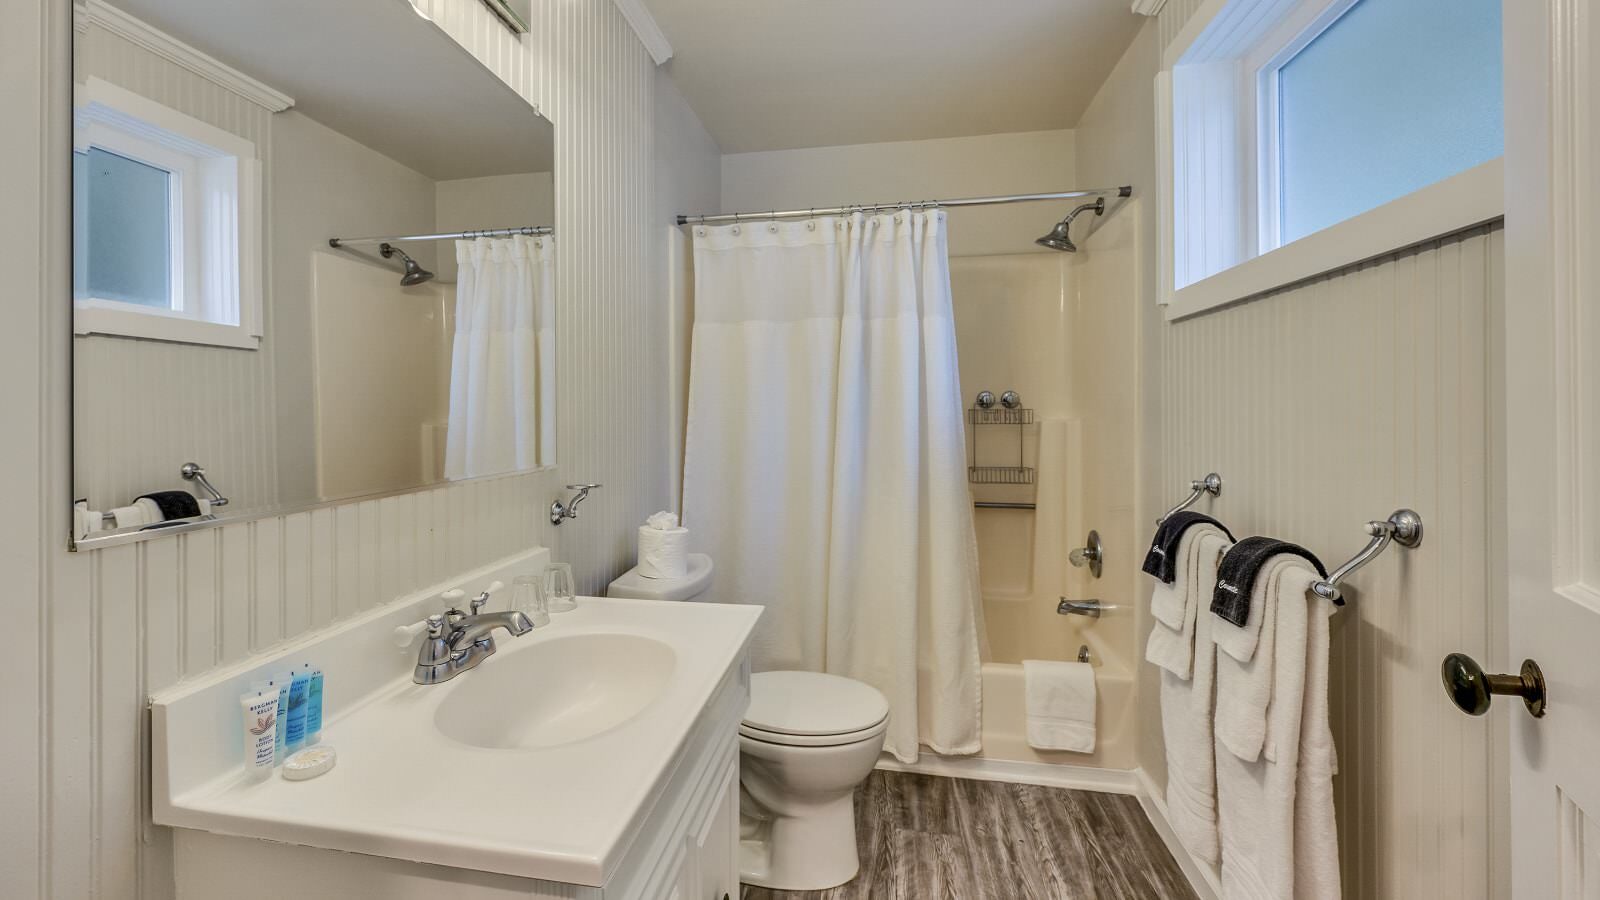 Bathroom with white walls, tub and shower combo, white toilet, and white vanity